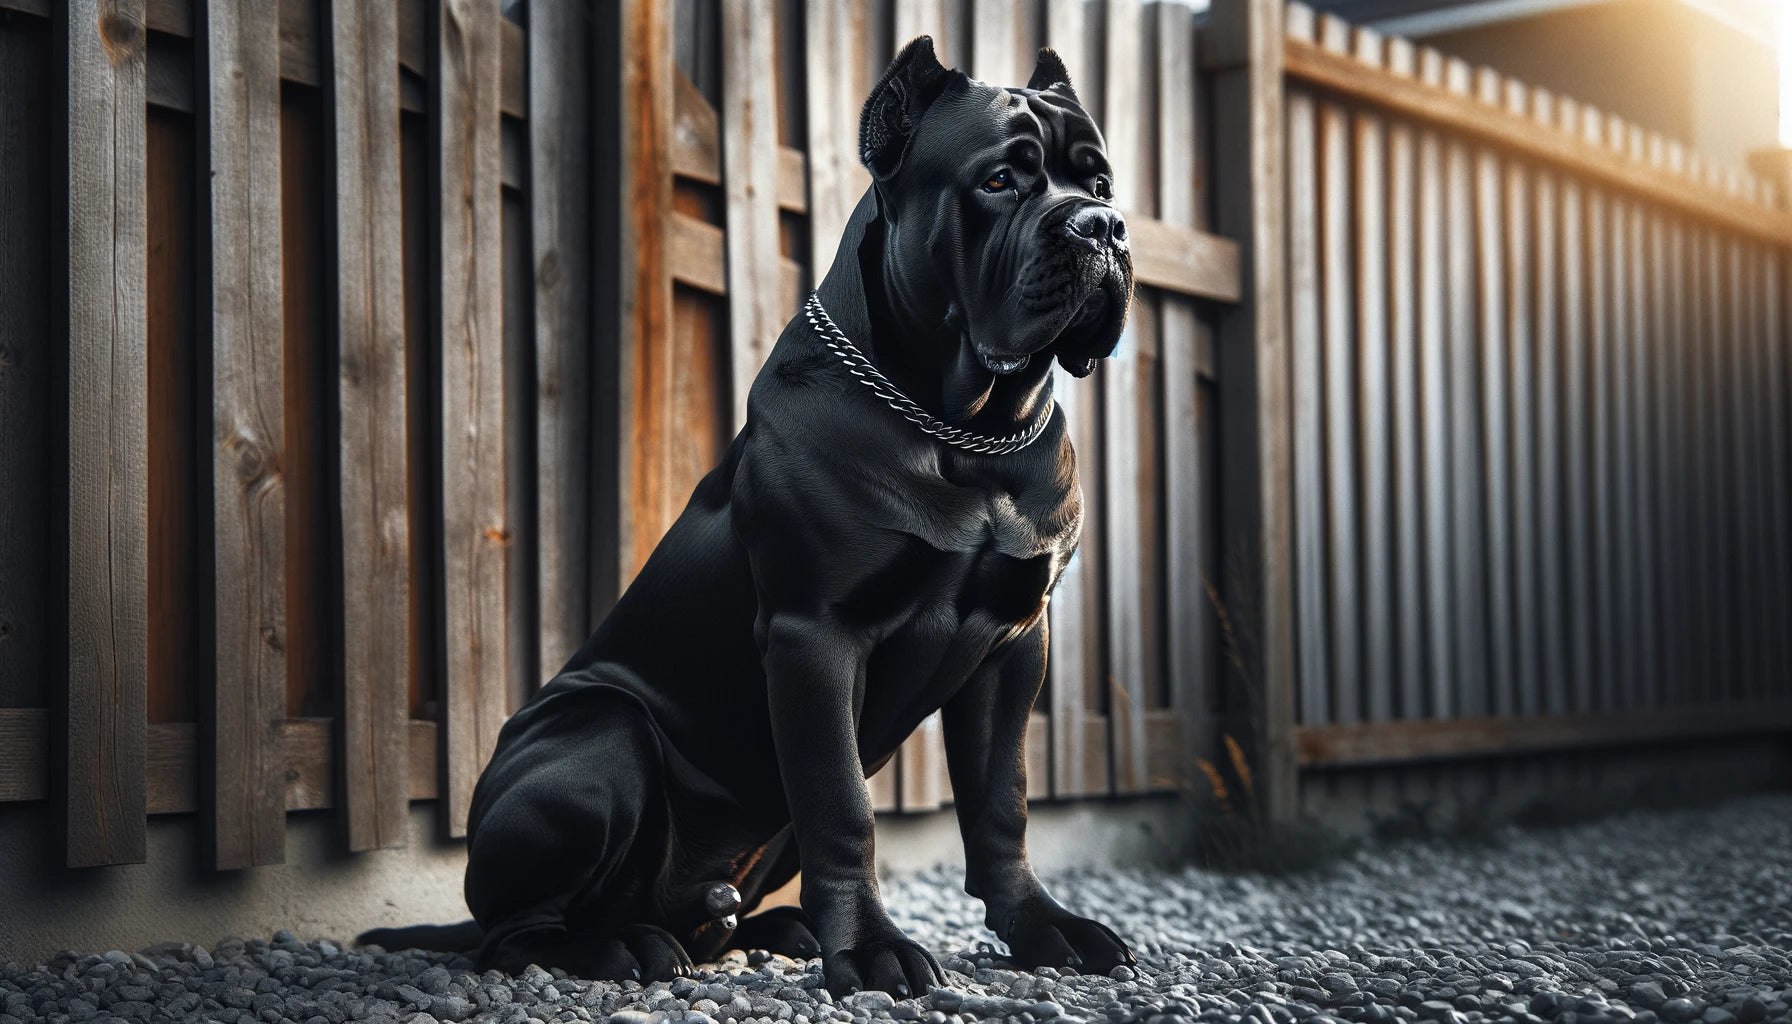 Black Cane Corso dog sitting attentively in front of a wooden fence